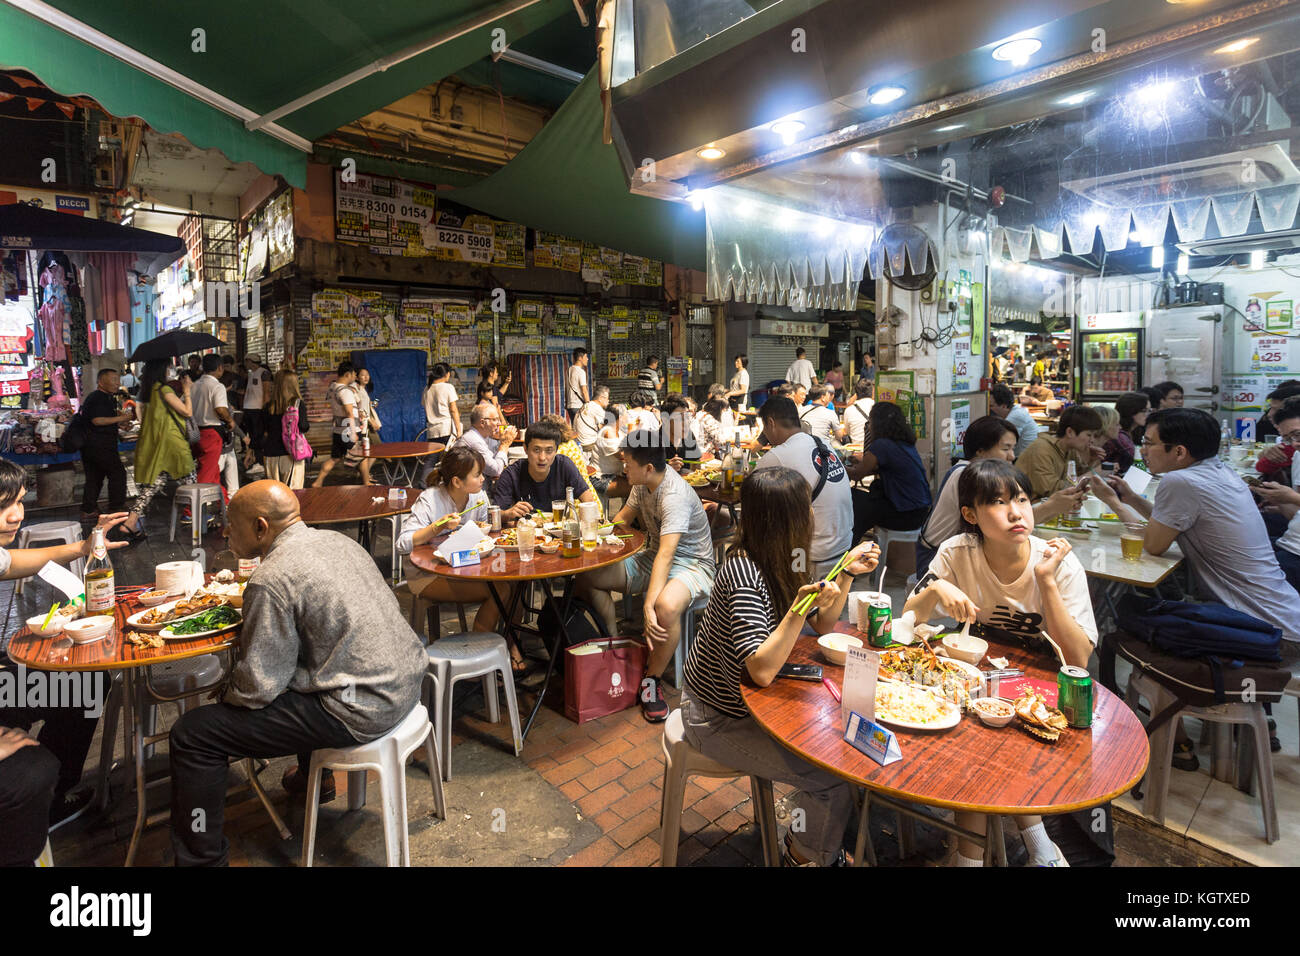 HONG KONG, CHINA - JUNE 16, 2017: Tourists and local dine in a restaurant in the streets of Kowloon near the famous Temple night market in Hong Kong. Stock Photo